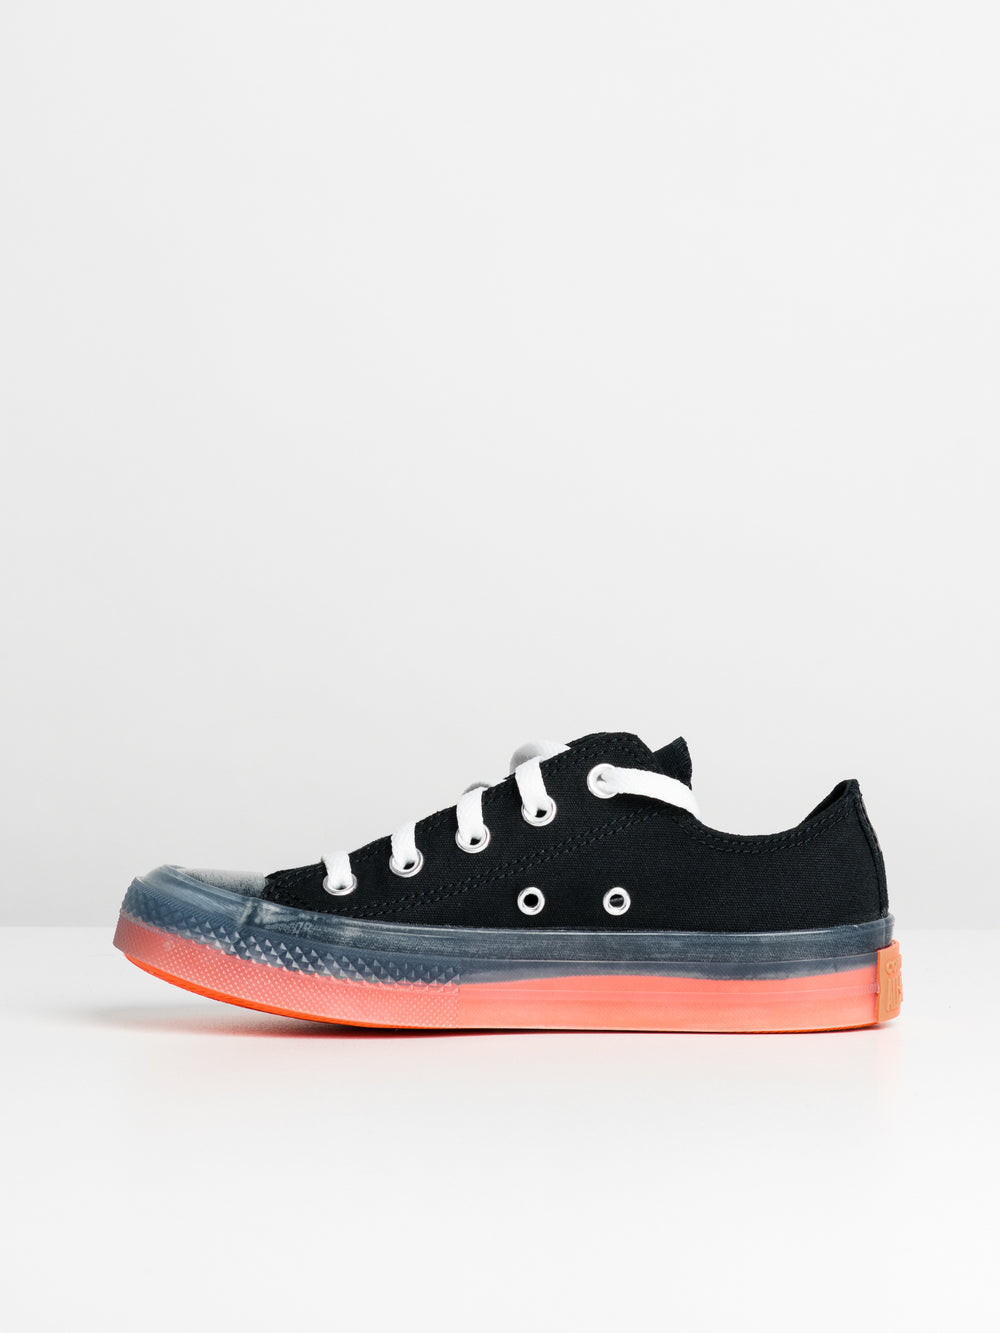 WOMENS CONVERSE CX OXFORD SNEAKER - CLEARANCE